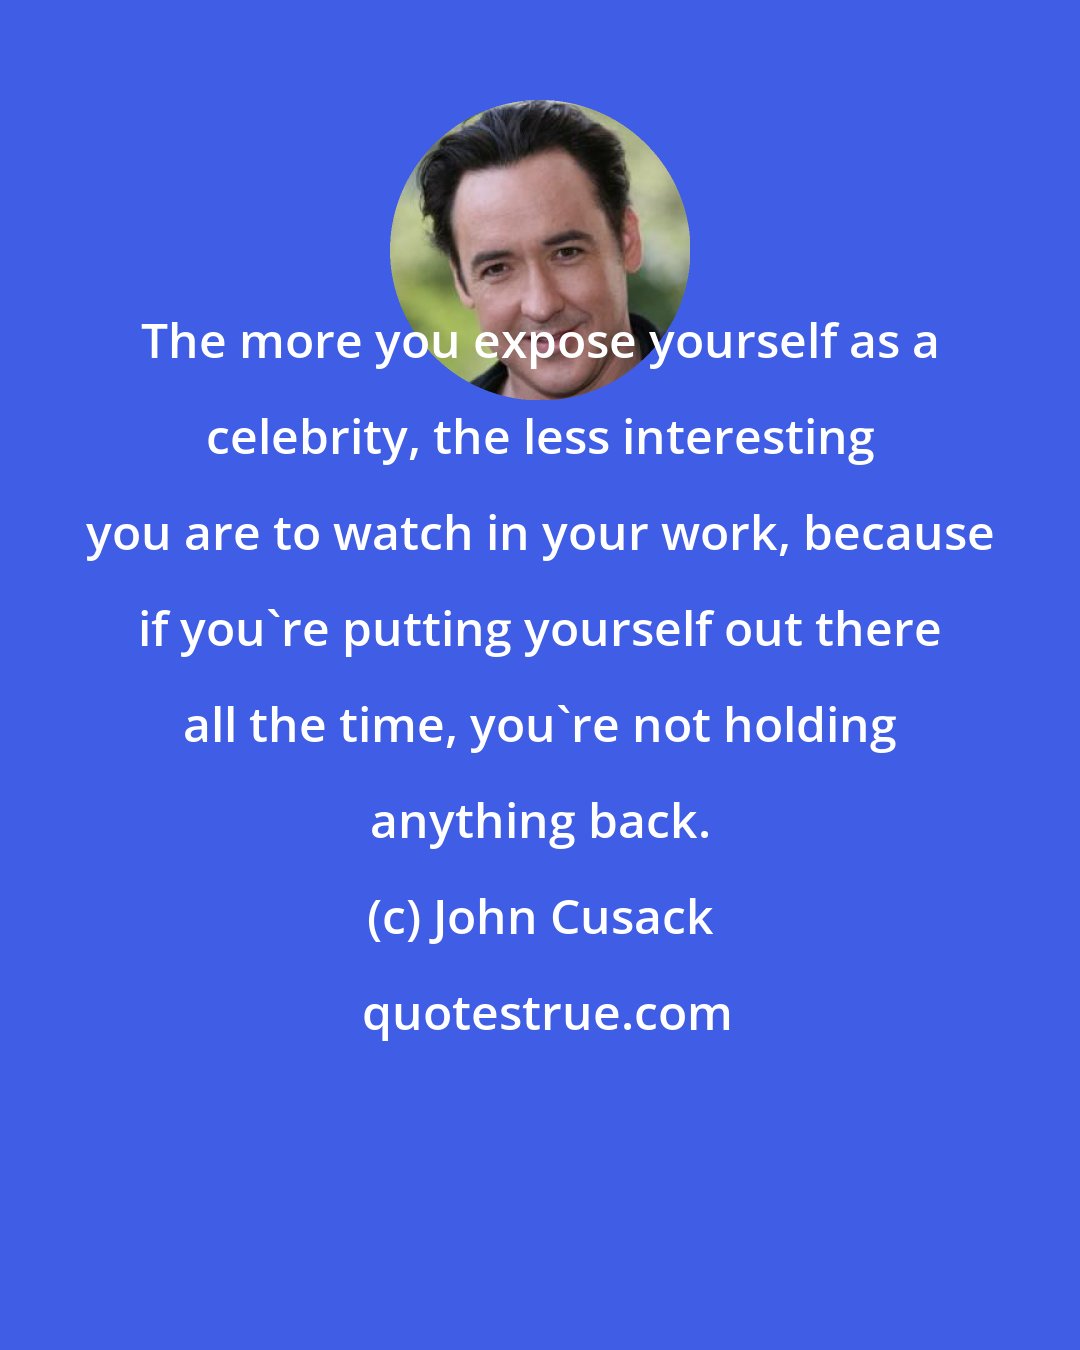 John Cusack: The more you expose yourself as a celebrity, the less interesting you are to watch in your work, because if you're putting yourself out there all the time, you're not holding anything back.